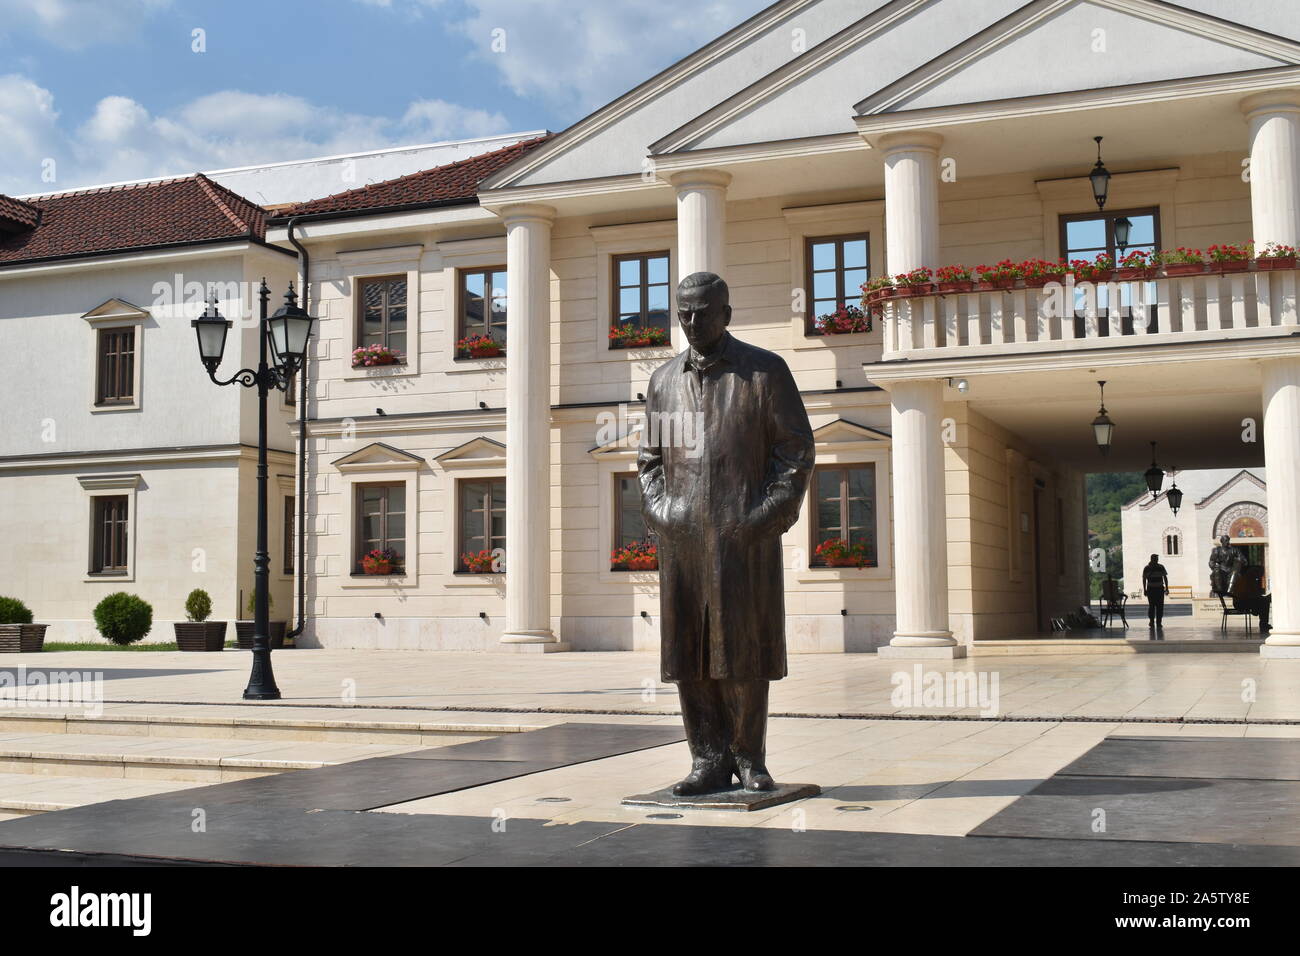 A monument to Ivo Andric, one of the most famous writers from Balkans, in Visegrad, Bosnia and Herzegovina. Stock Photo